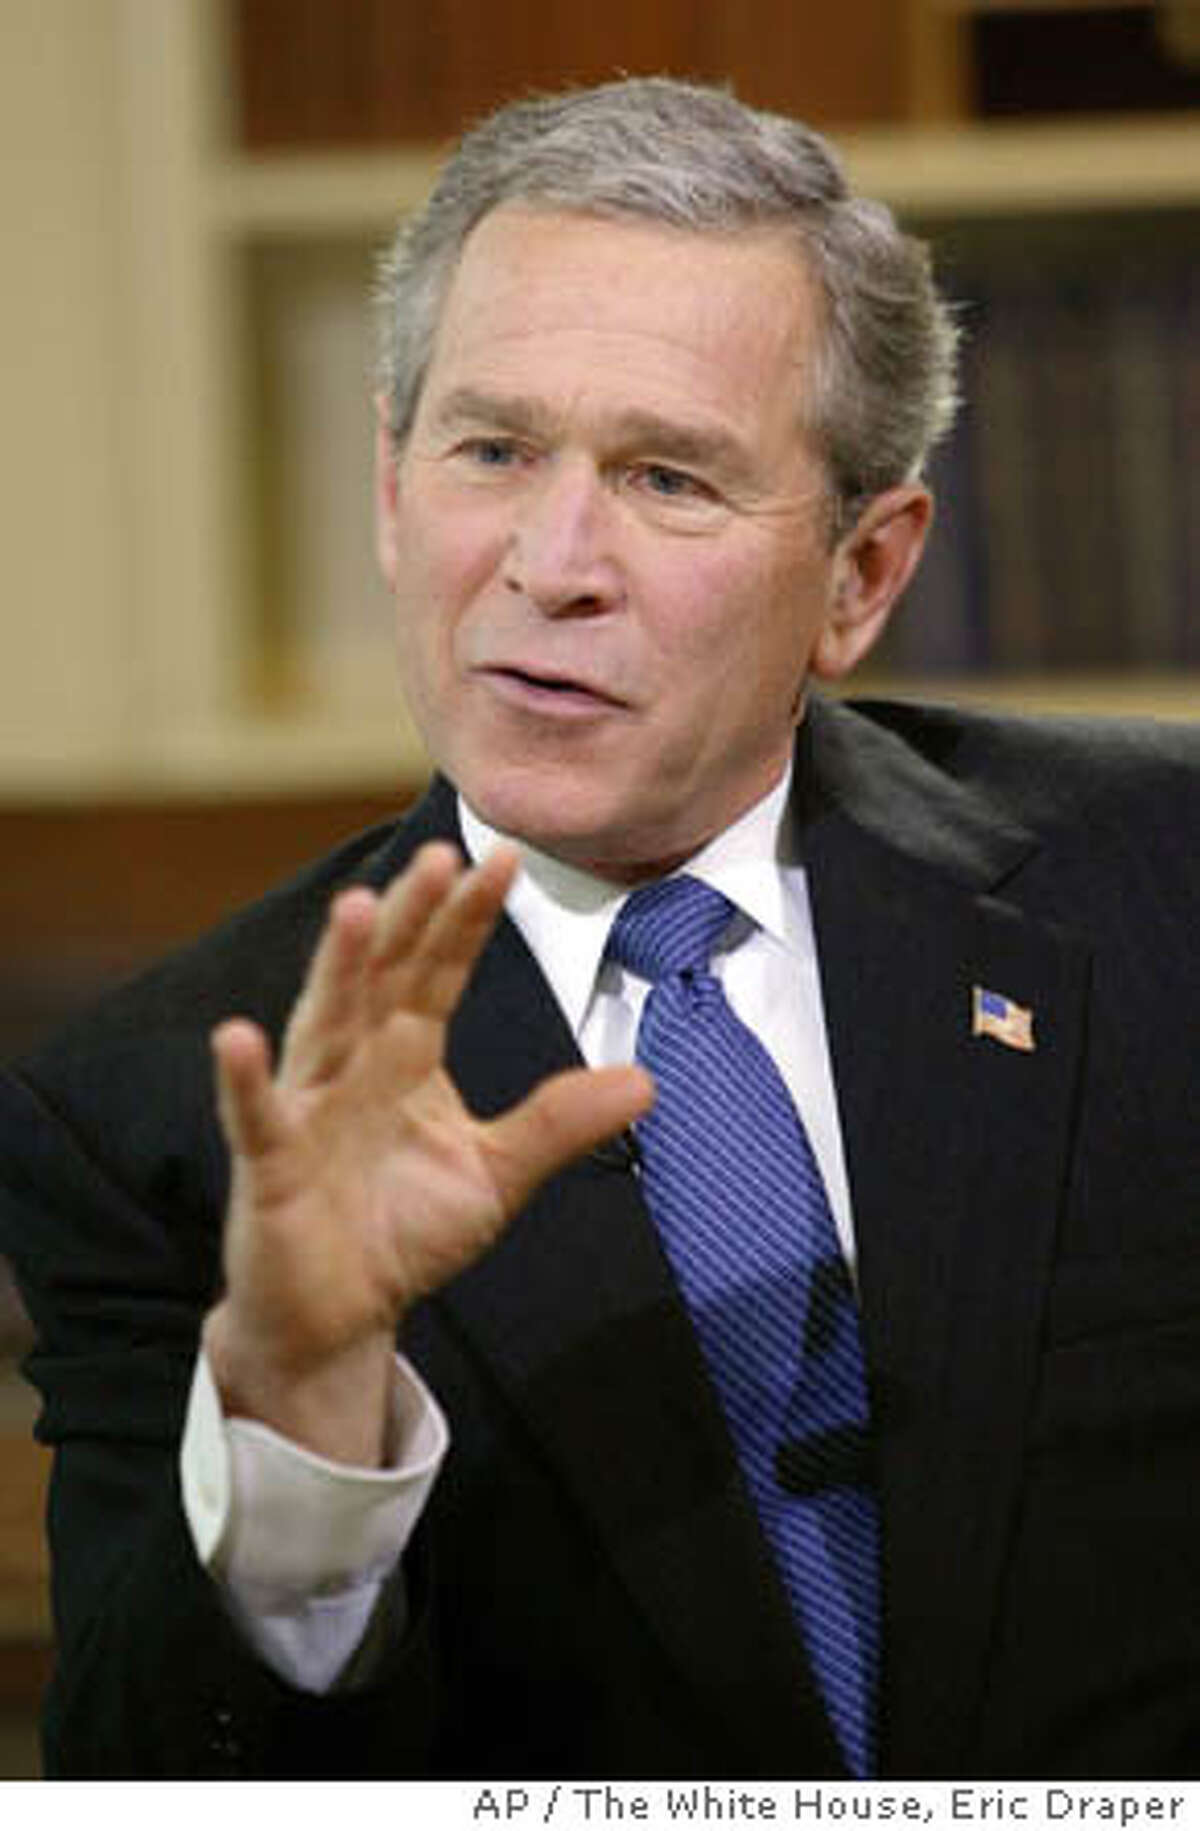 President Bush makes a point as he is interviewed on NBC's "Meet the Press" during a pre-taping Saturday, Feb. 7, 2004, in the Oval Office of the White House in Washington. During the interview with NBC moderator Tim Russert Bush denied he led the nation to war under false pretenses. The show aired on NBC Sunday, Feb. 8, 2004. (AP Photo/The White House, Eric Draper)